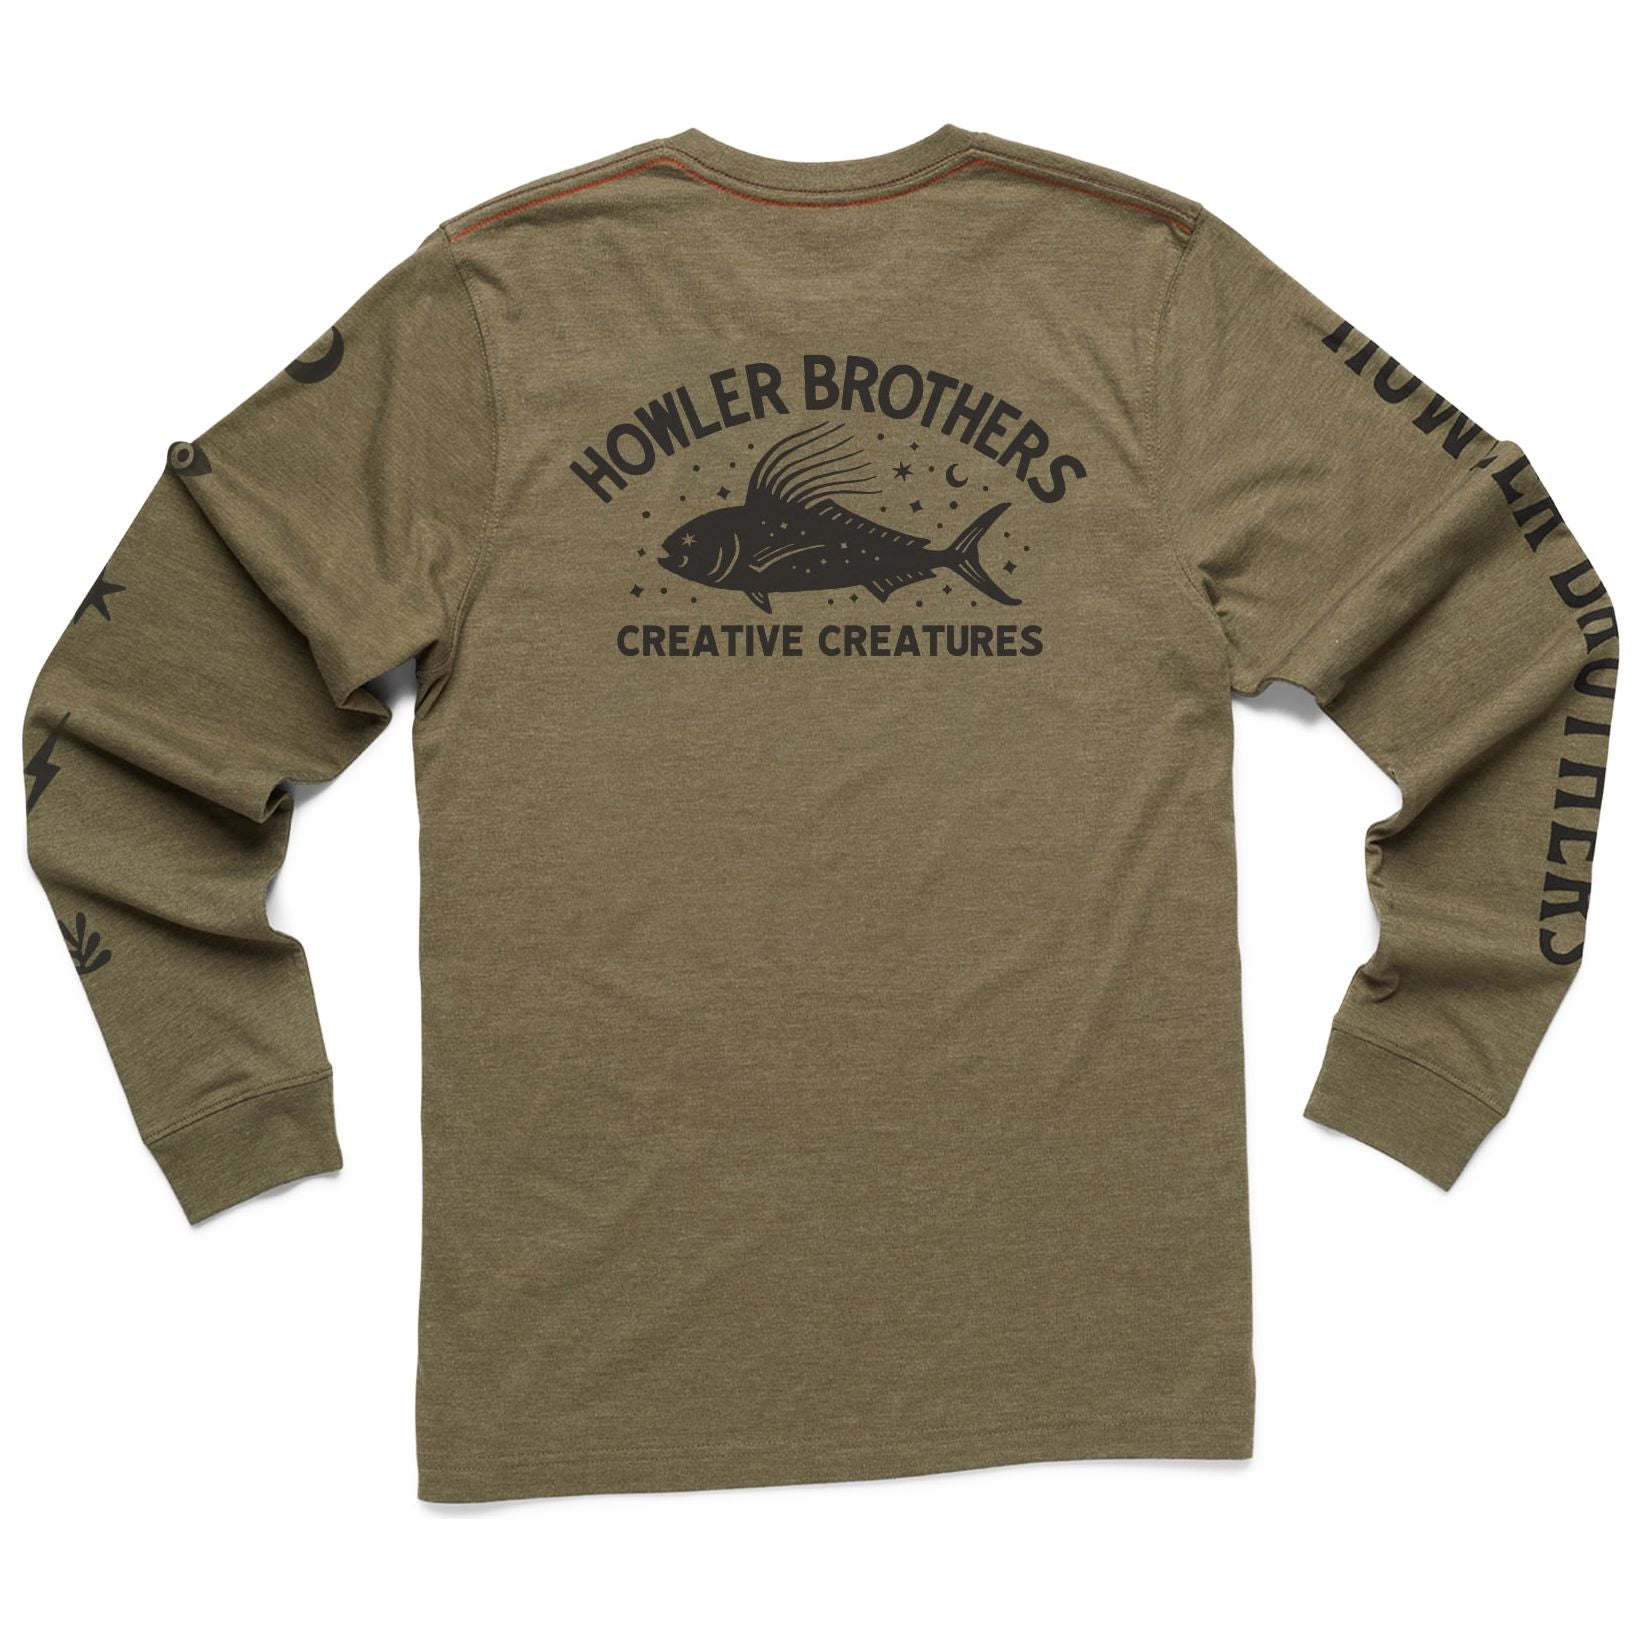 Howler Brothers Select Longsleeve T Creative Creatures Roosterfish: Fatigue Heather Image 1